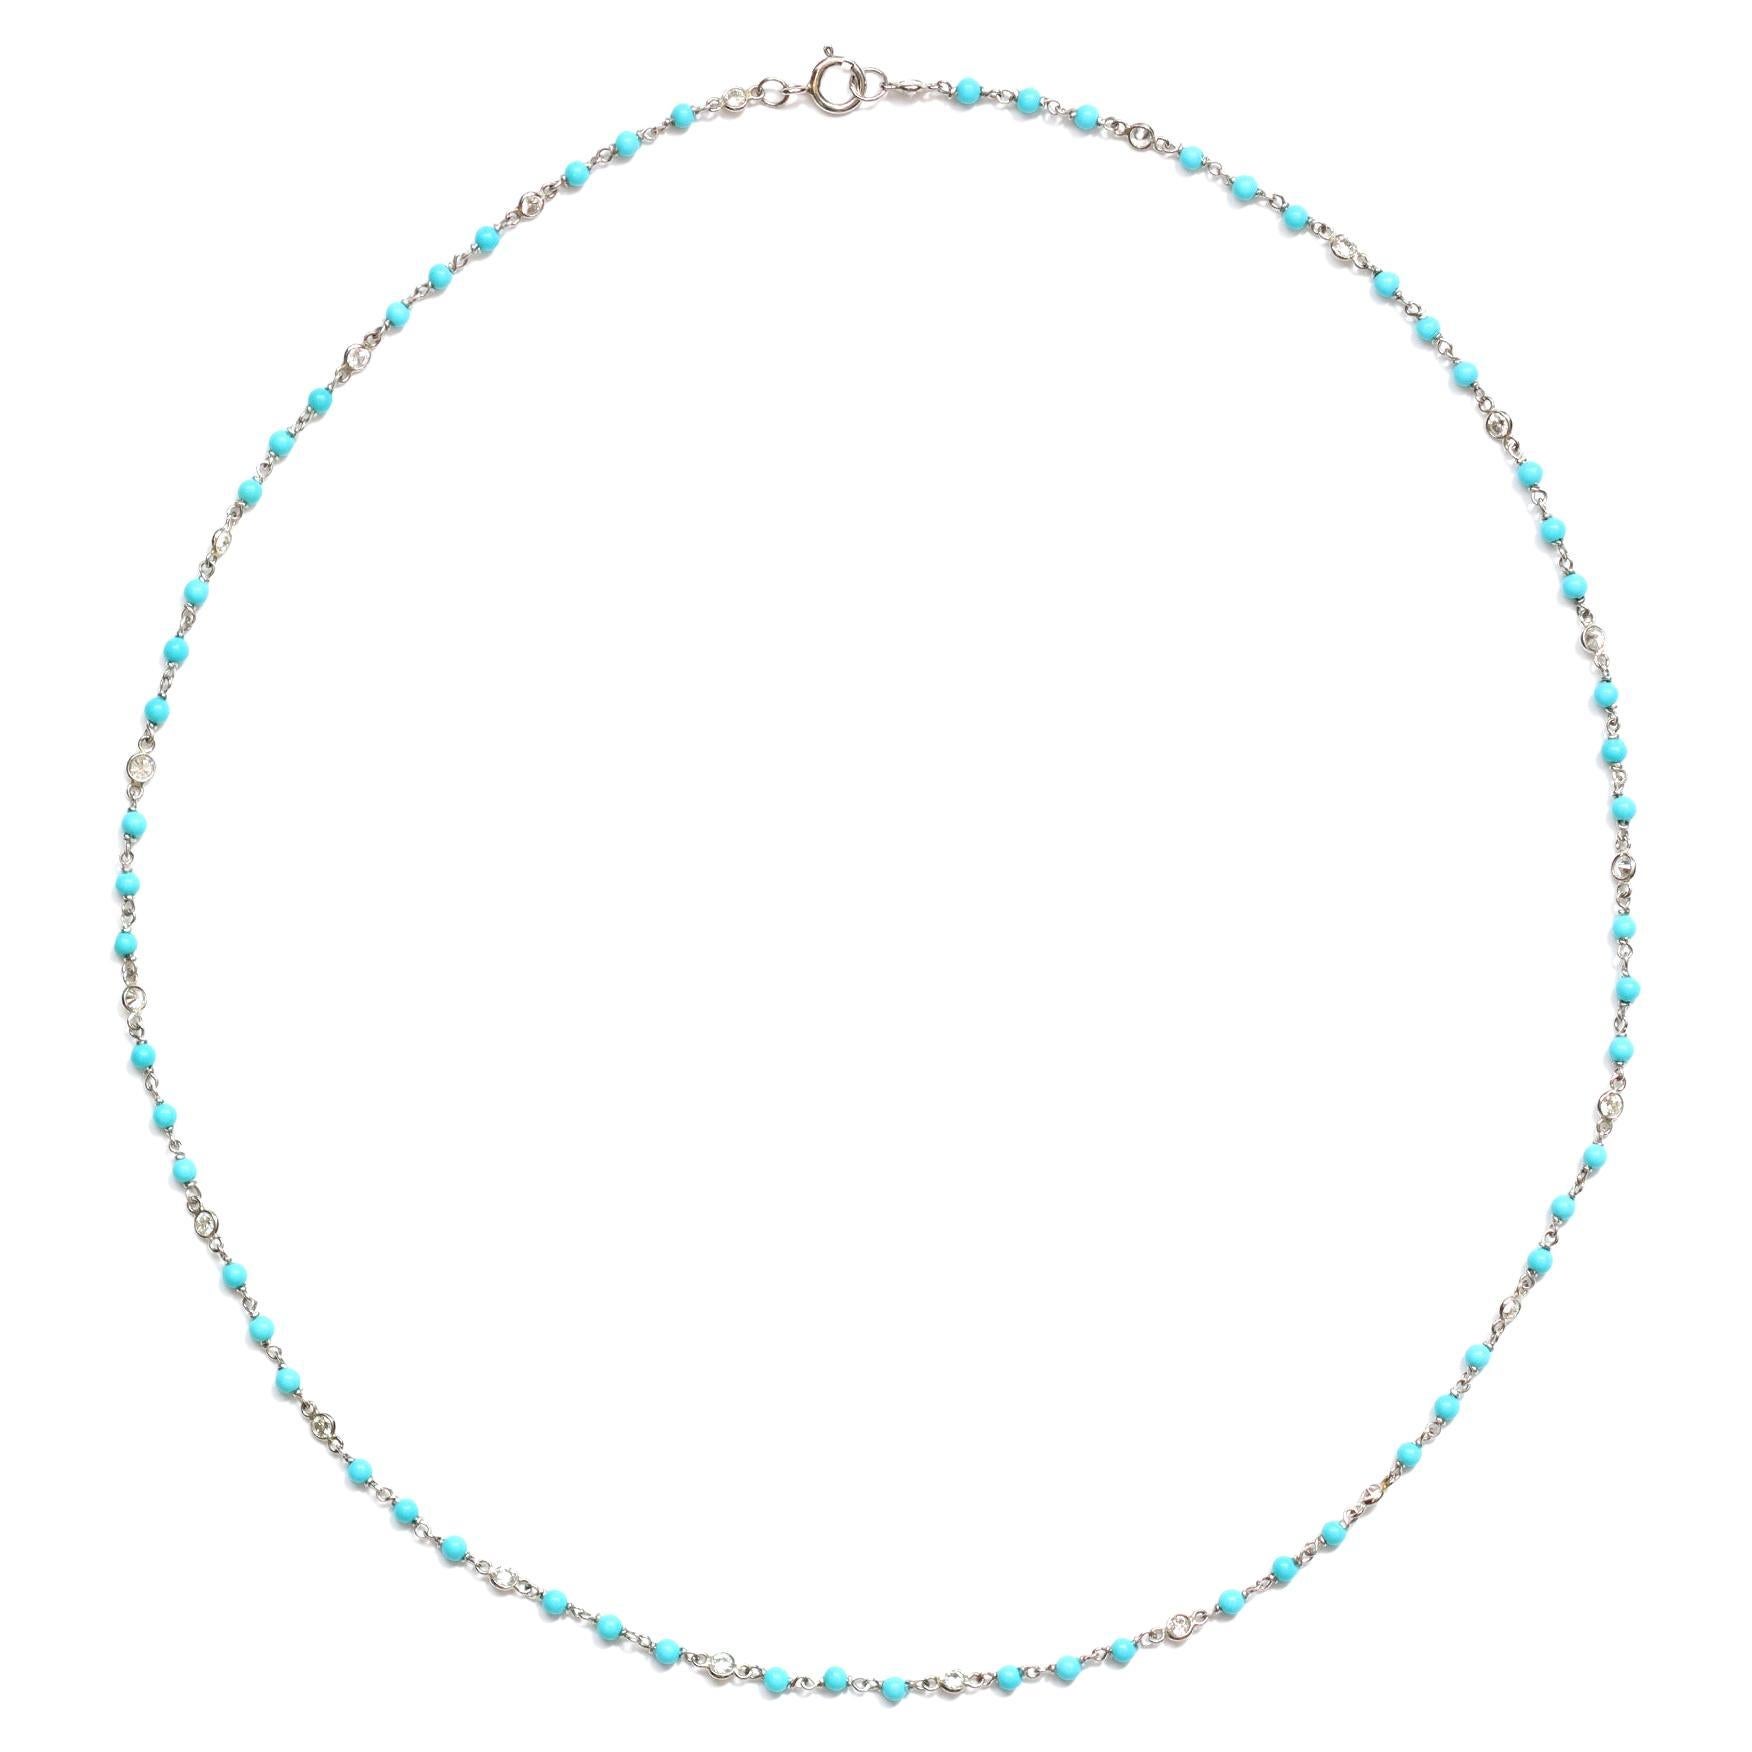 A dainty handmade Platinum necklace signed by Rosaria Varra featuring alternating round turquoise beads and bezel-set round diamonds. The natural untreated turquoise beads are 2 millimeter in diameter and very well matched in color. The estimated